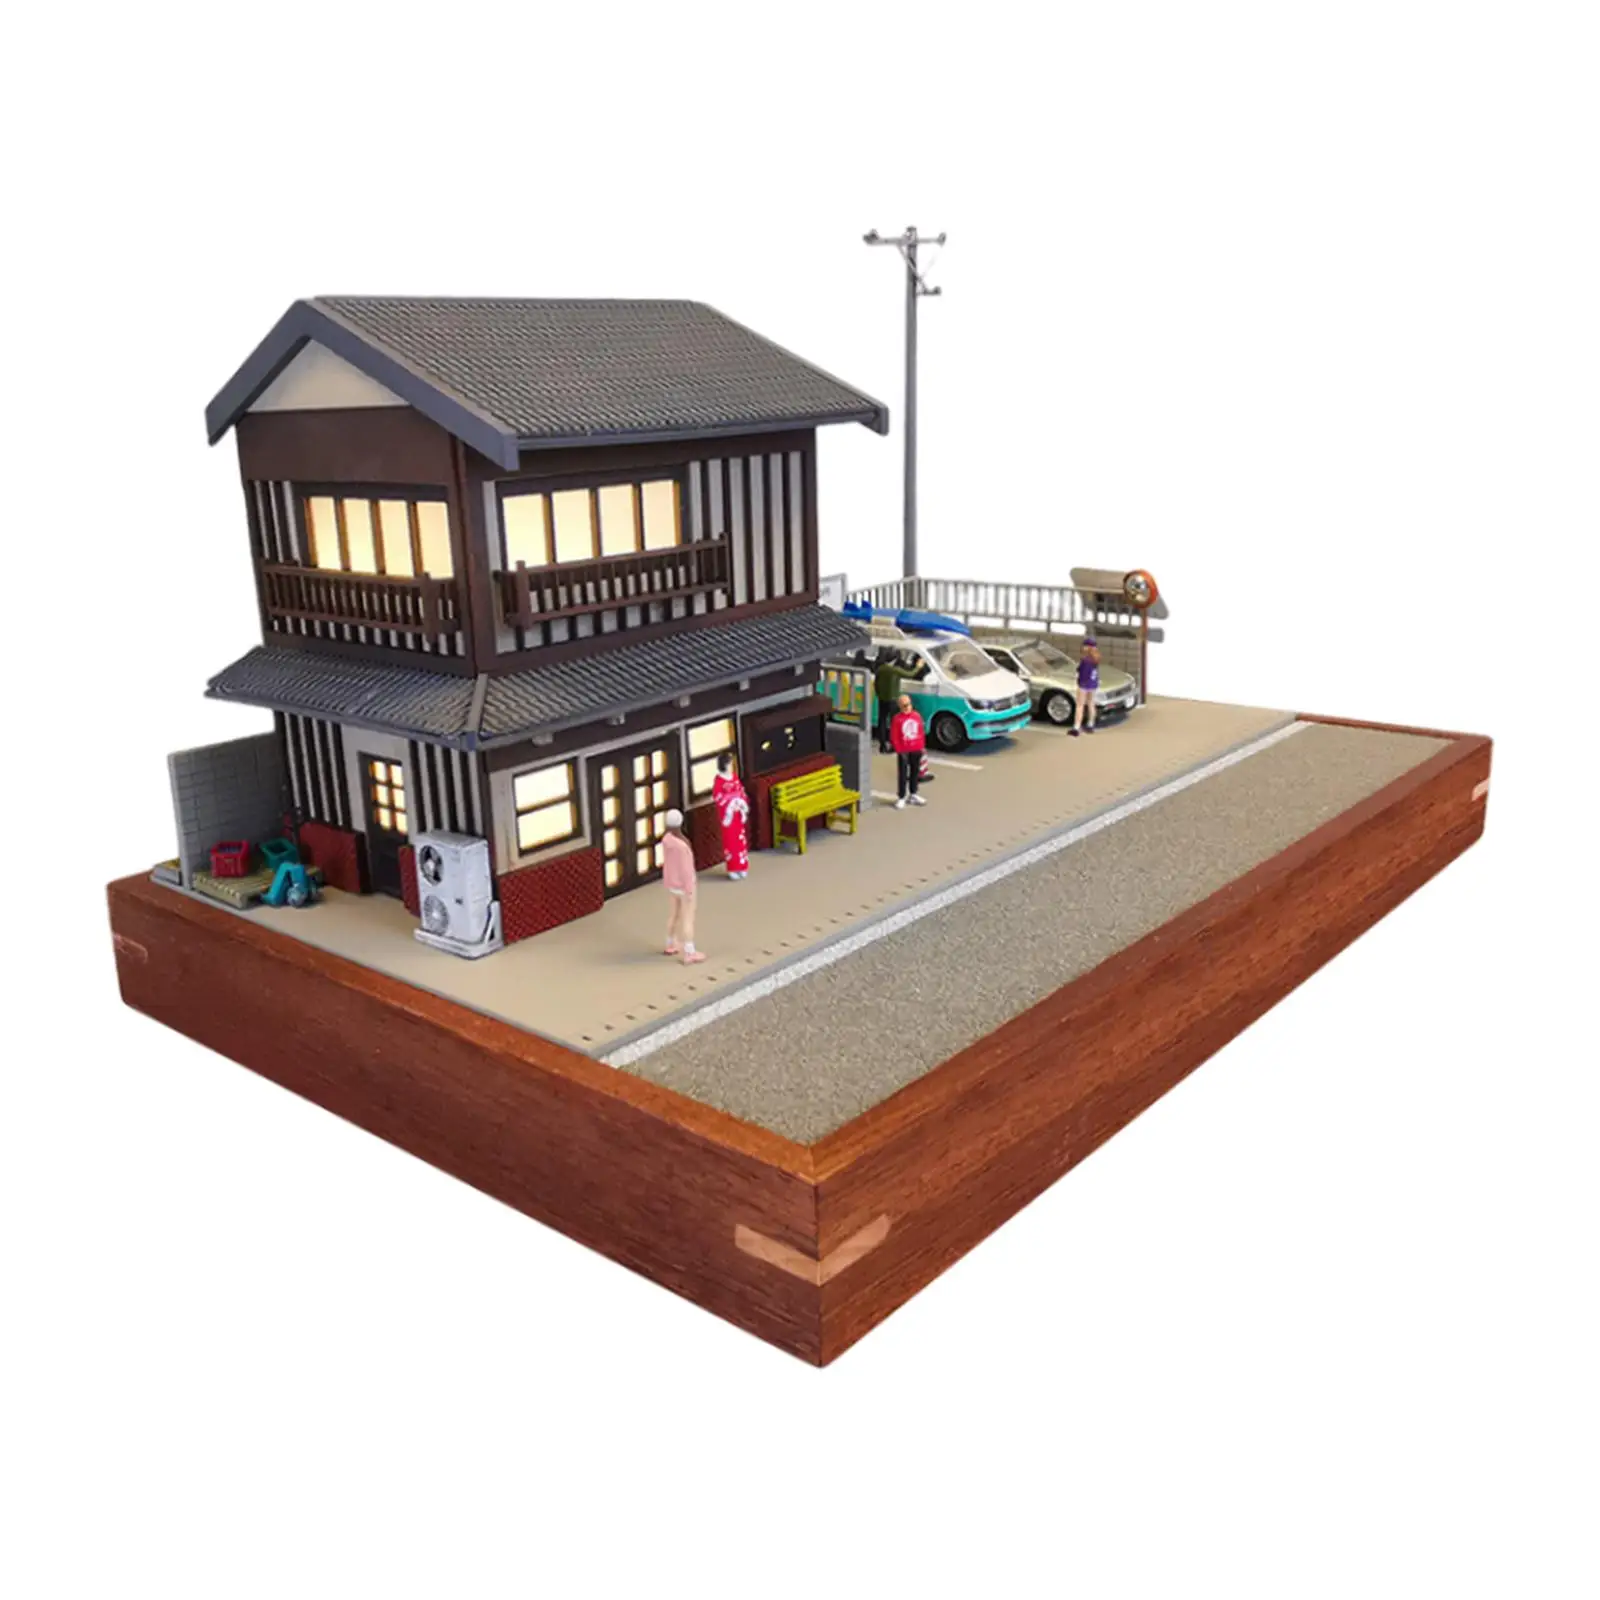 Building Display Scene Model Crafts 1/64 Building Model House for Micro Landscapes Decor DIY Scene Layout DIY Projects Accessory